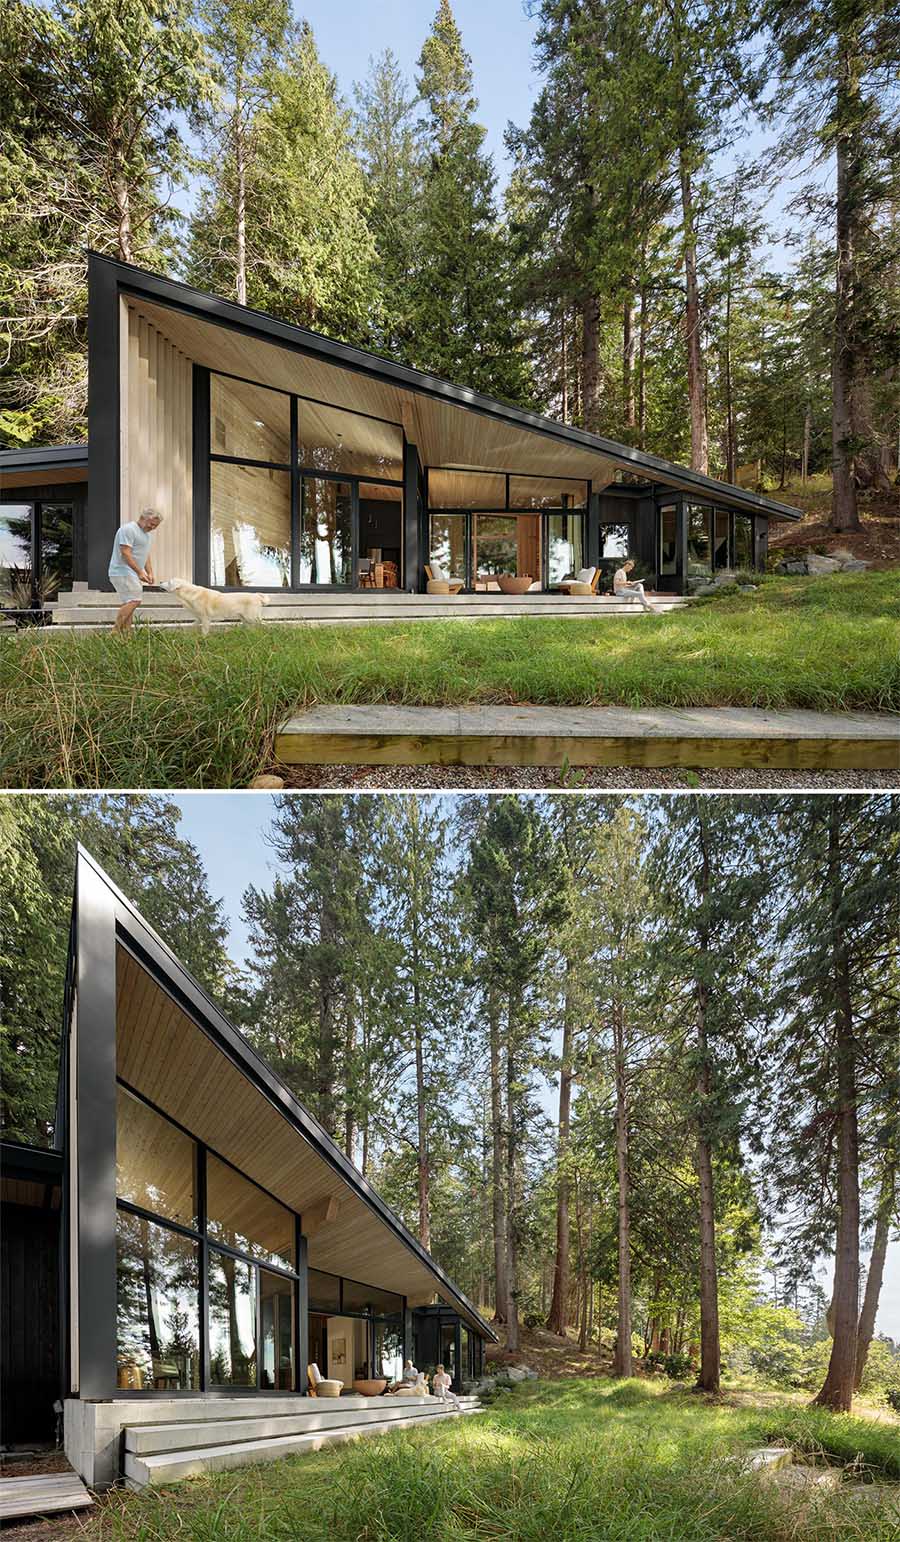 This modern cabin is clad with second-growth managed forestry cedar inside and out.